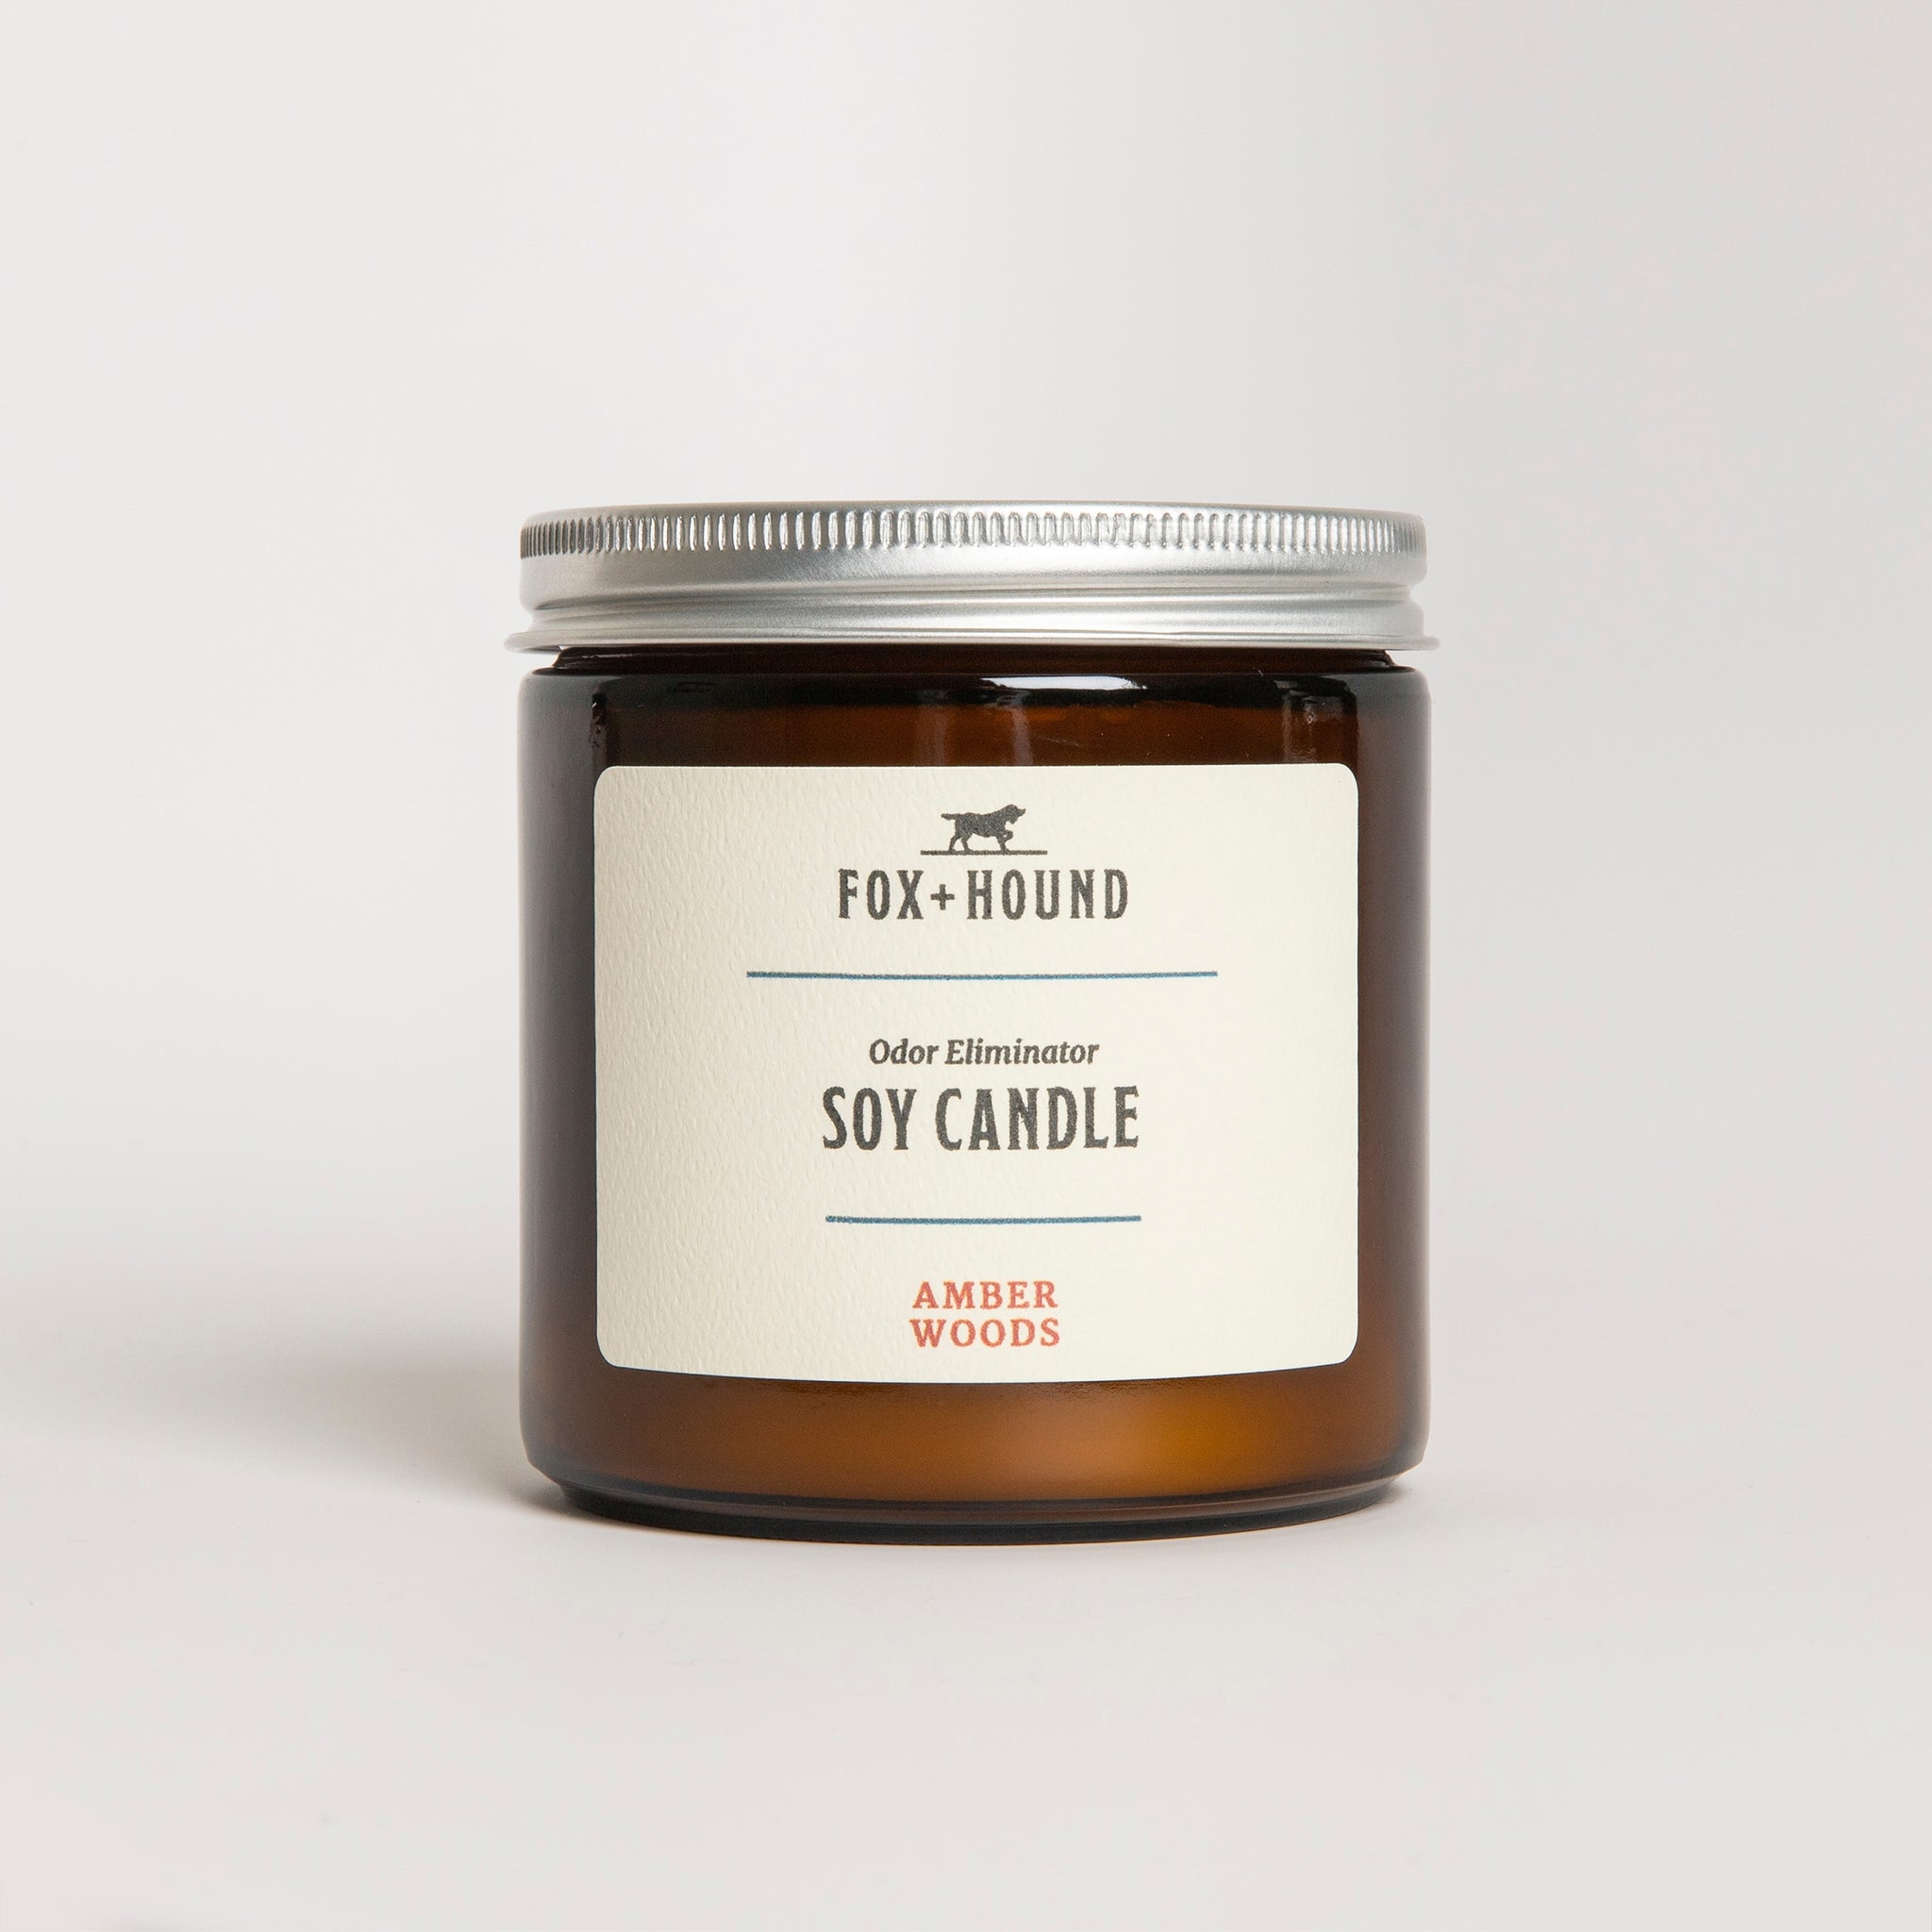 Odor Eliminator Soy Candle - Amber Woods - Fragrance - Holler Brighton - Fox and Hounds